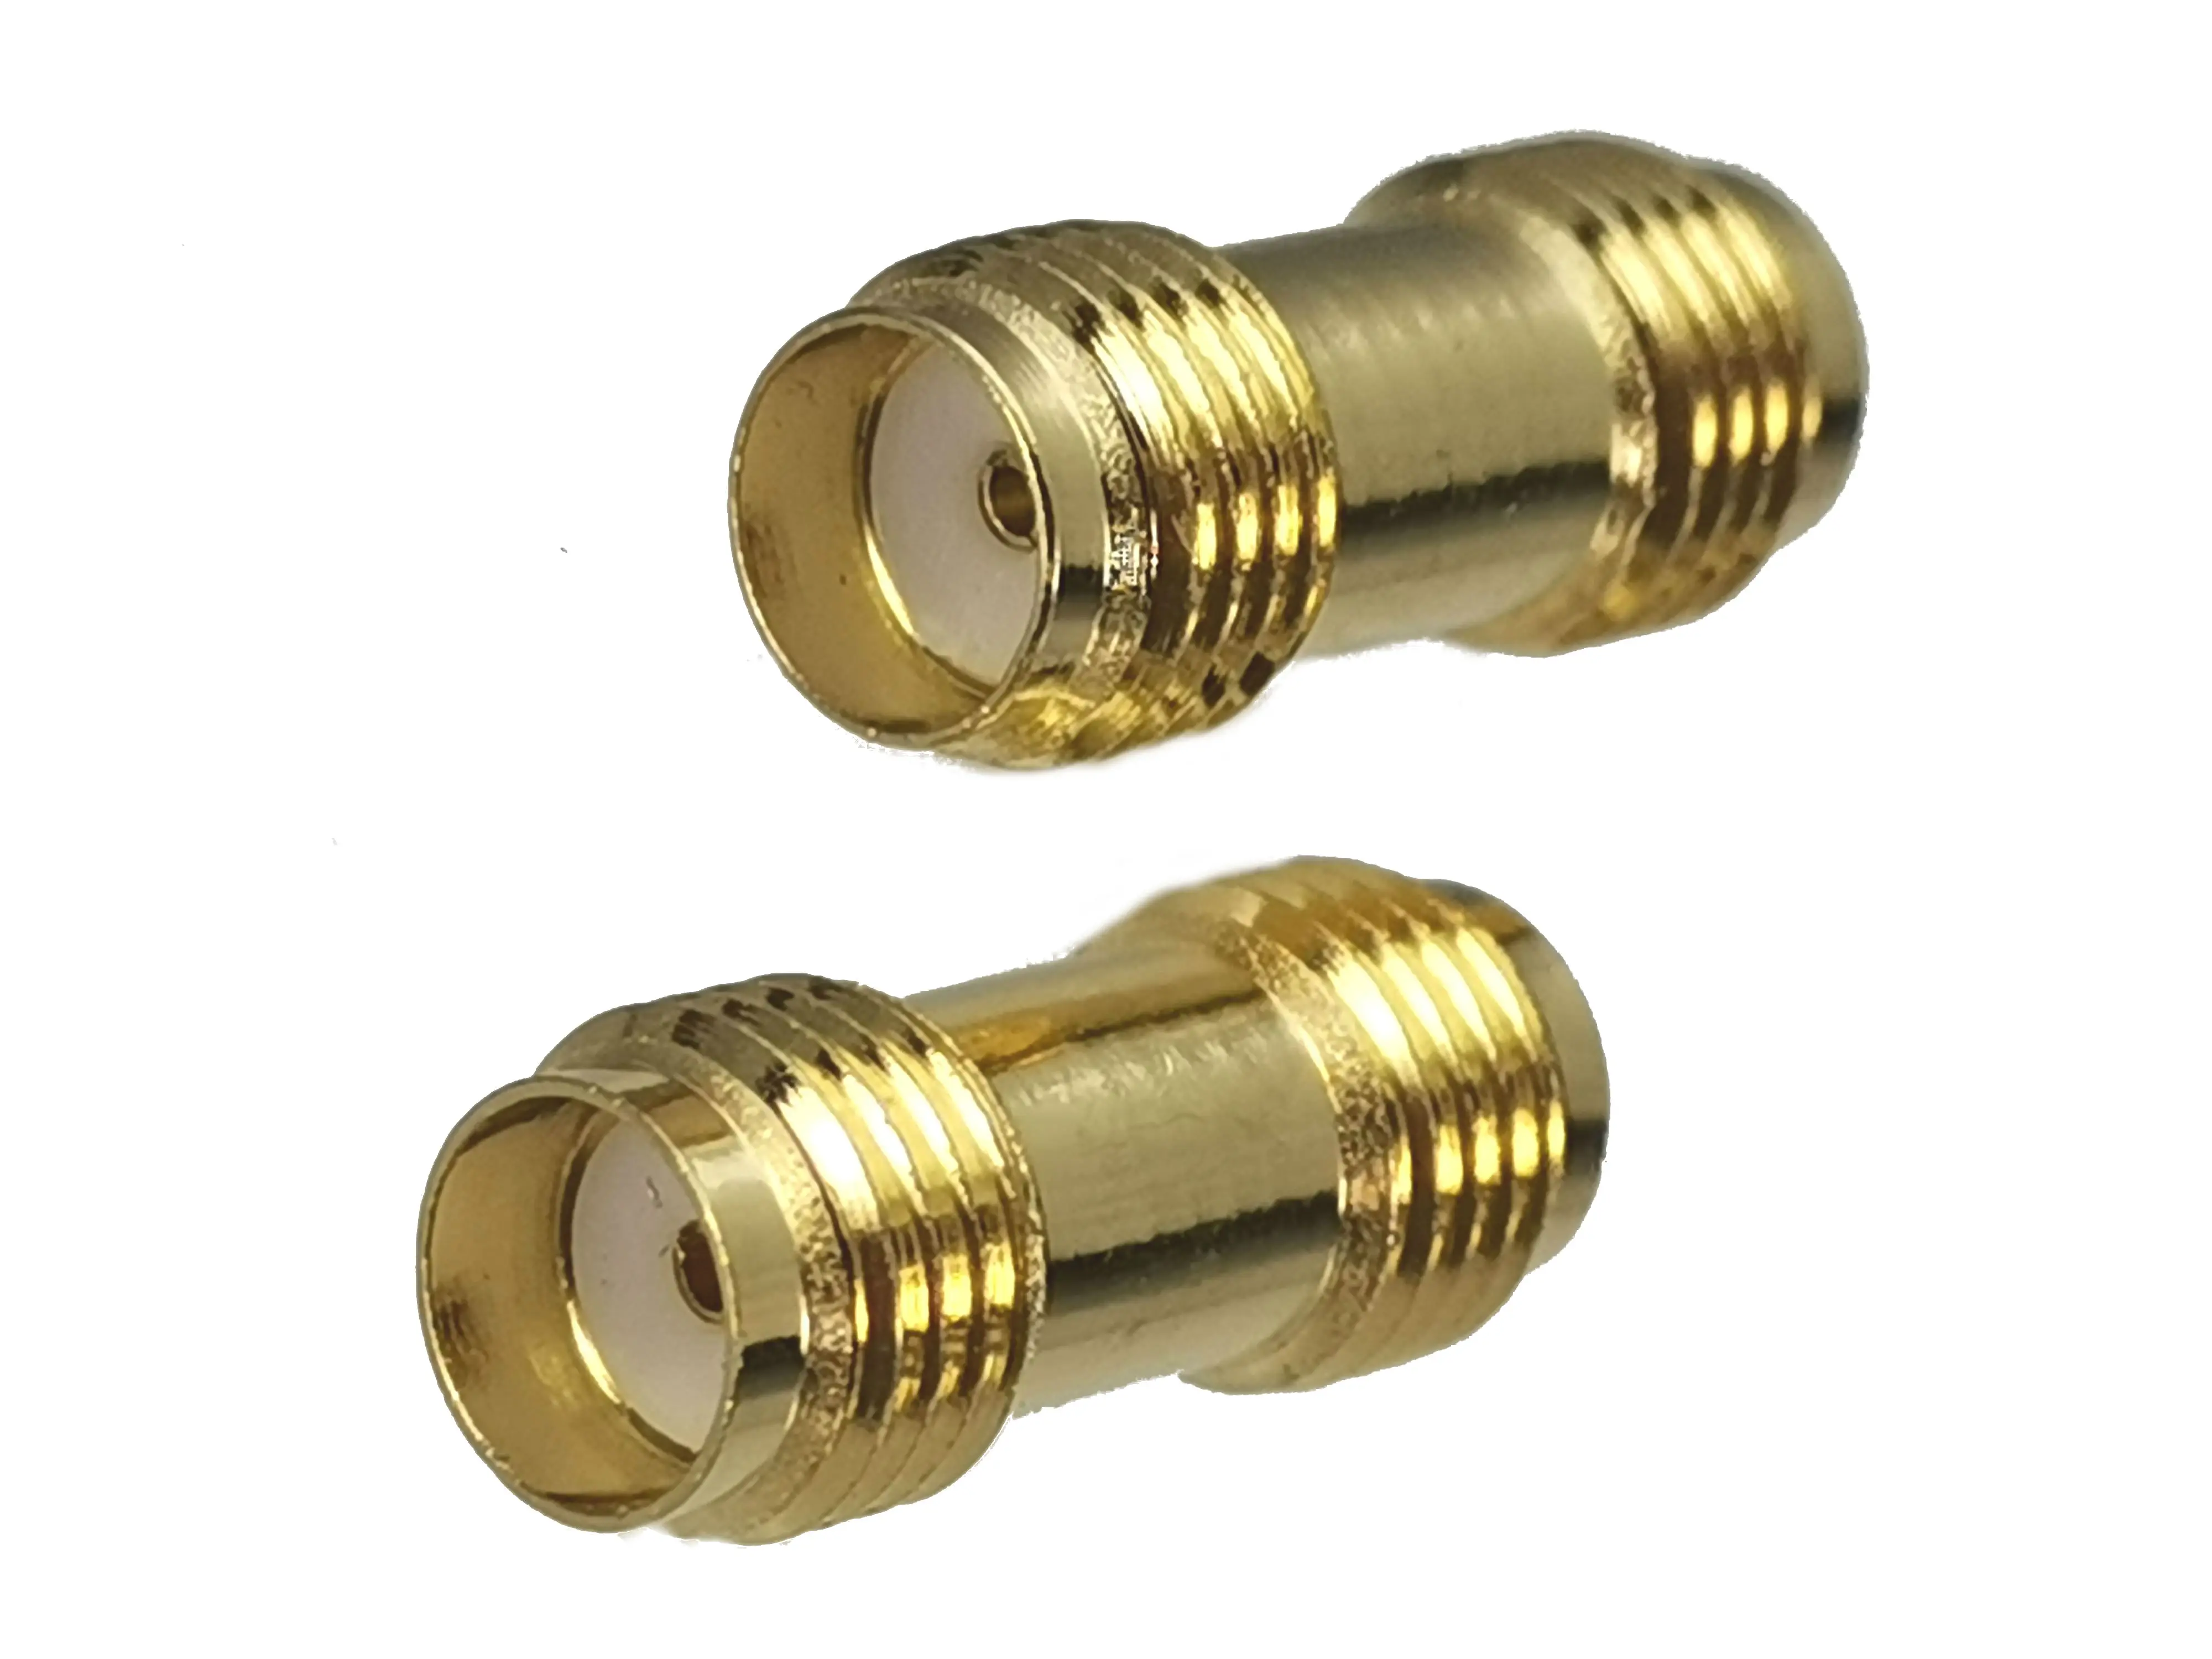 1pcs Connector Adapter SMA Female Jack to SMA Female Jack RF Coaxial Converter Straight New Brass